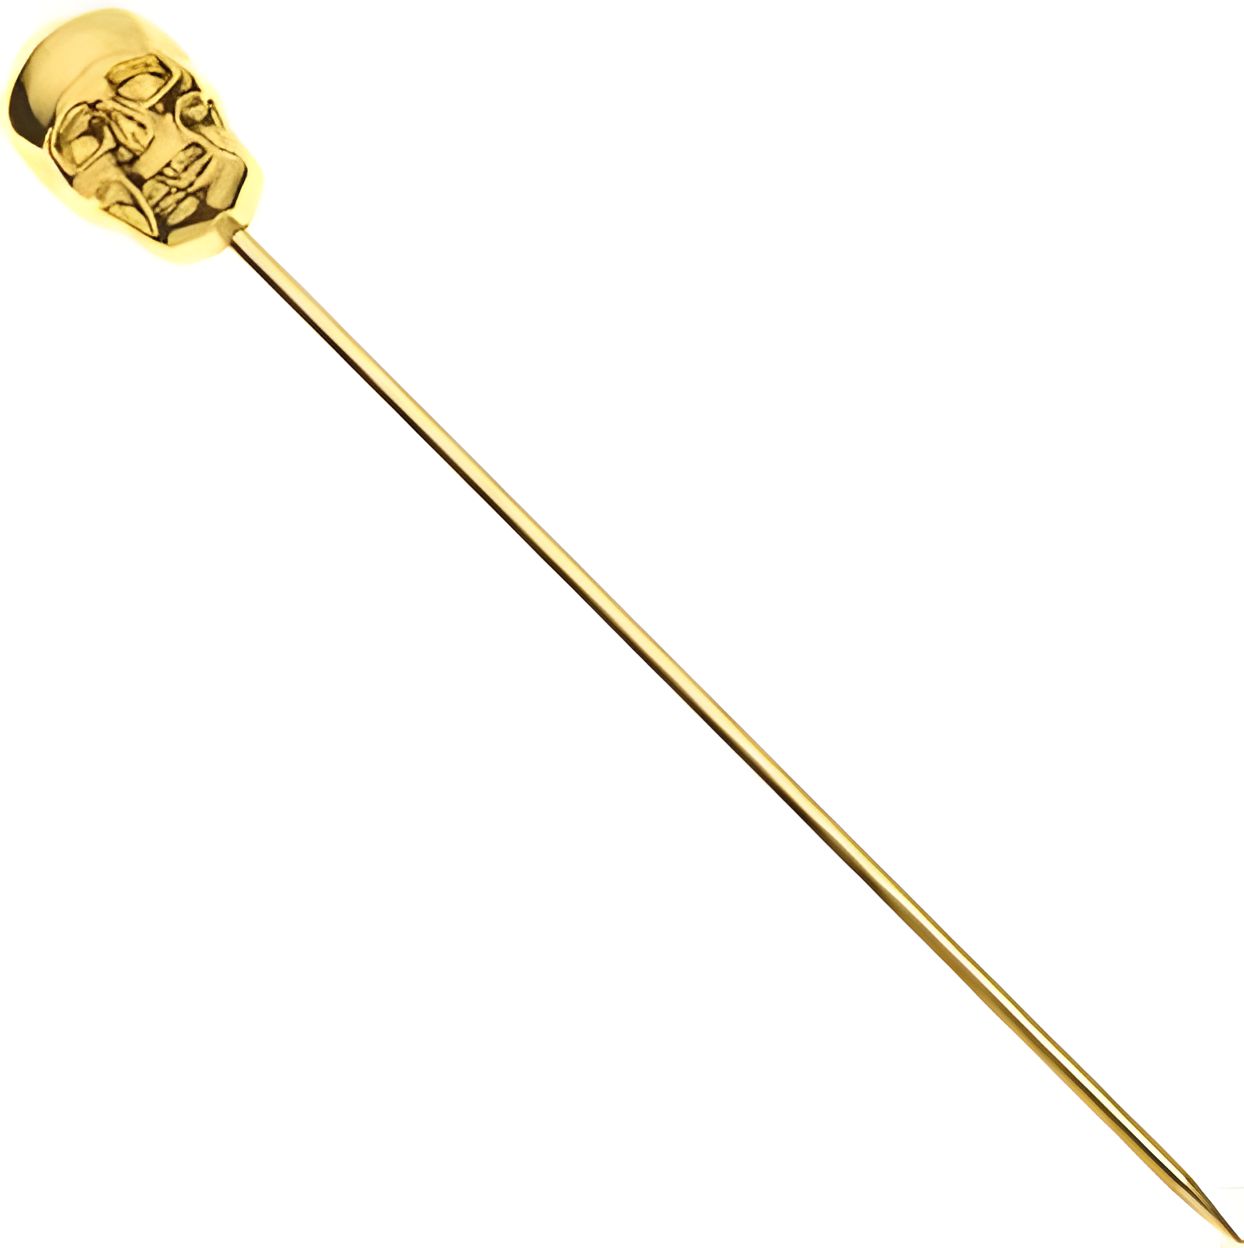 Barfly - 4.37" Gold Cocktail Pick with Skull Top - M37064GD